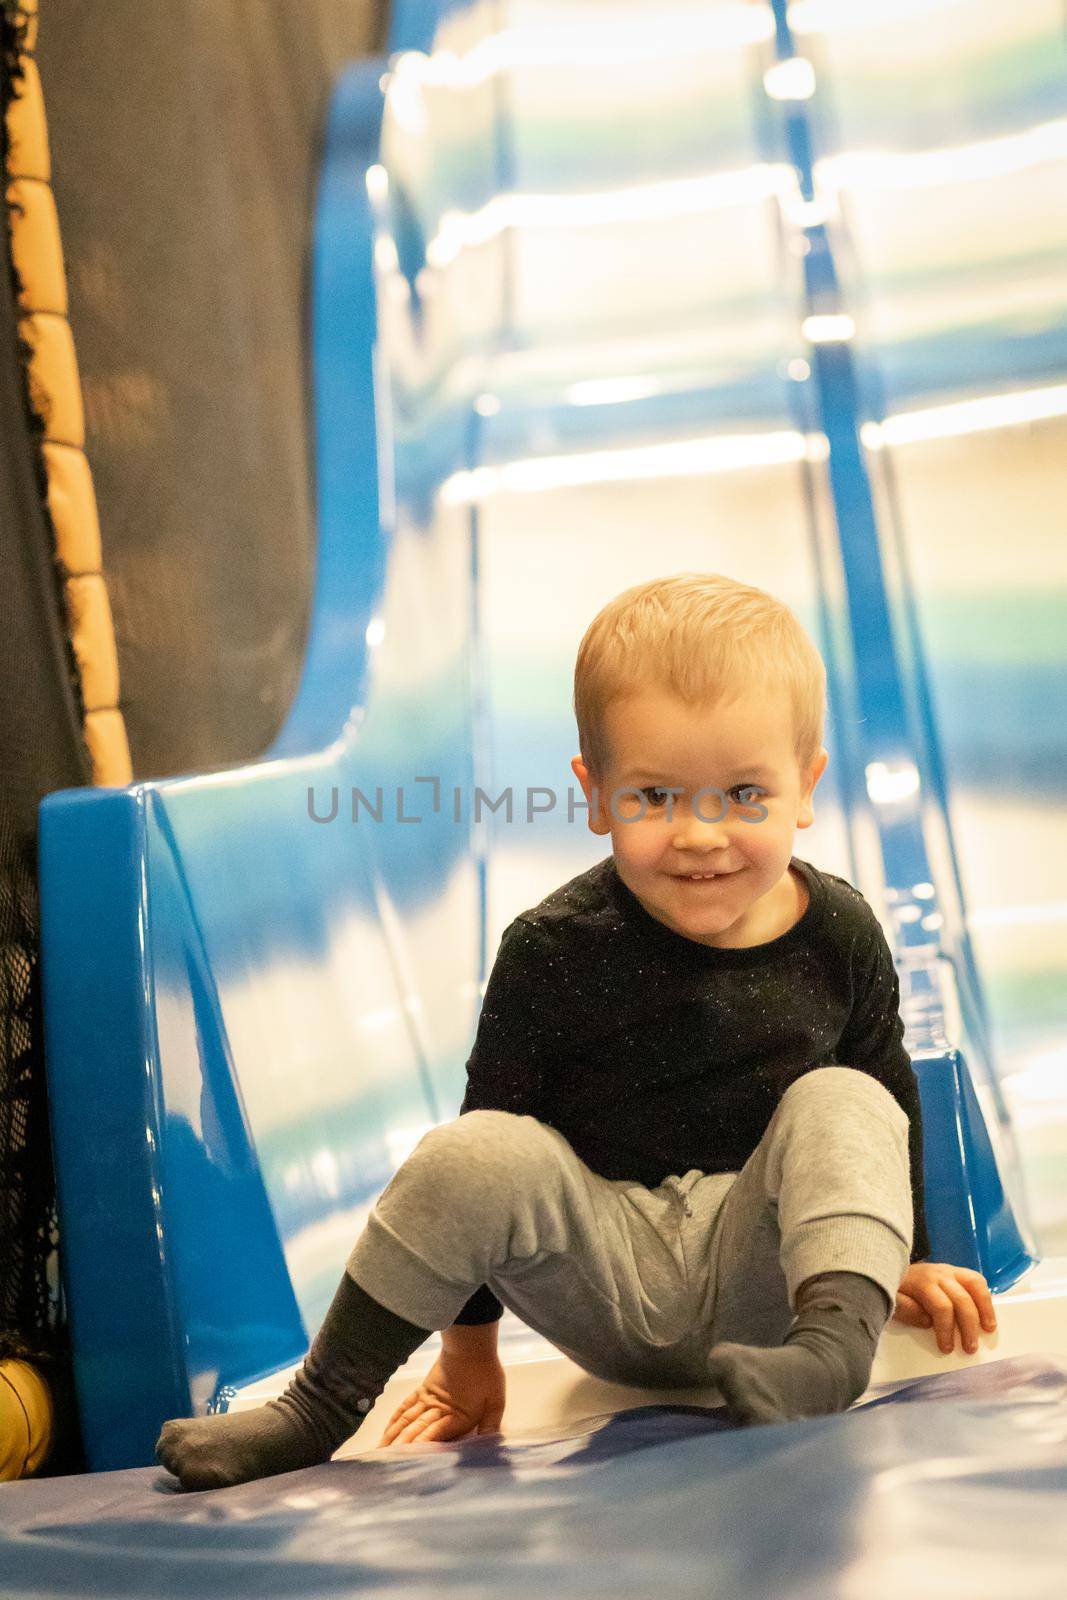 Little boy riding on slide in entertainment center by Lincikas